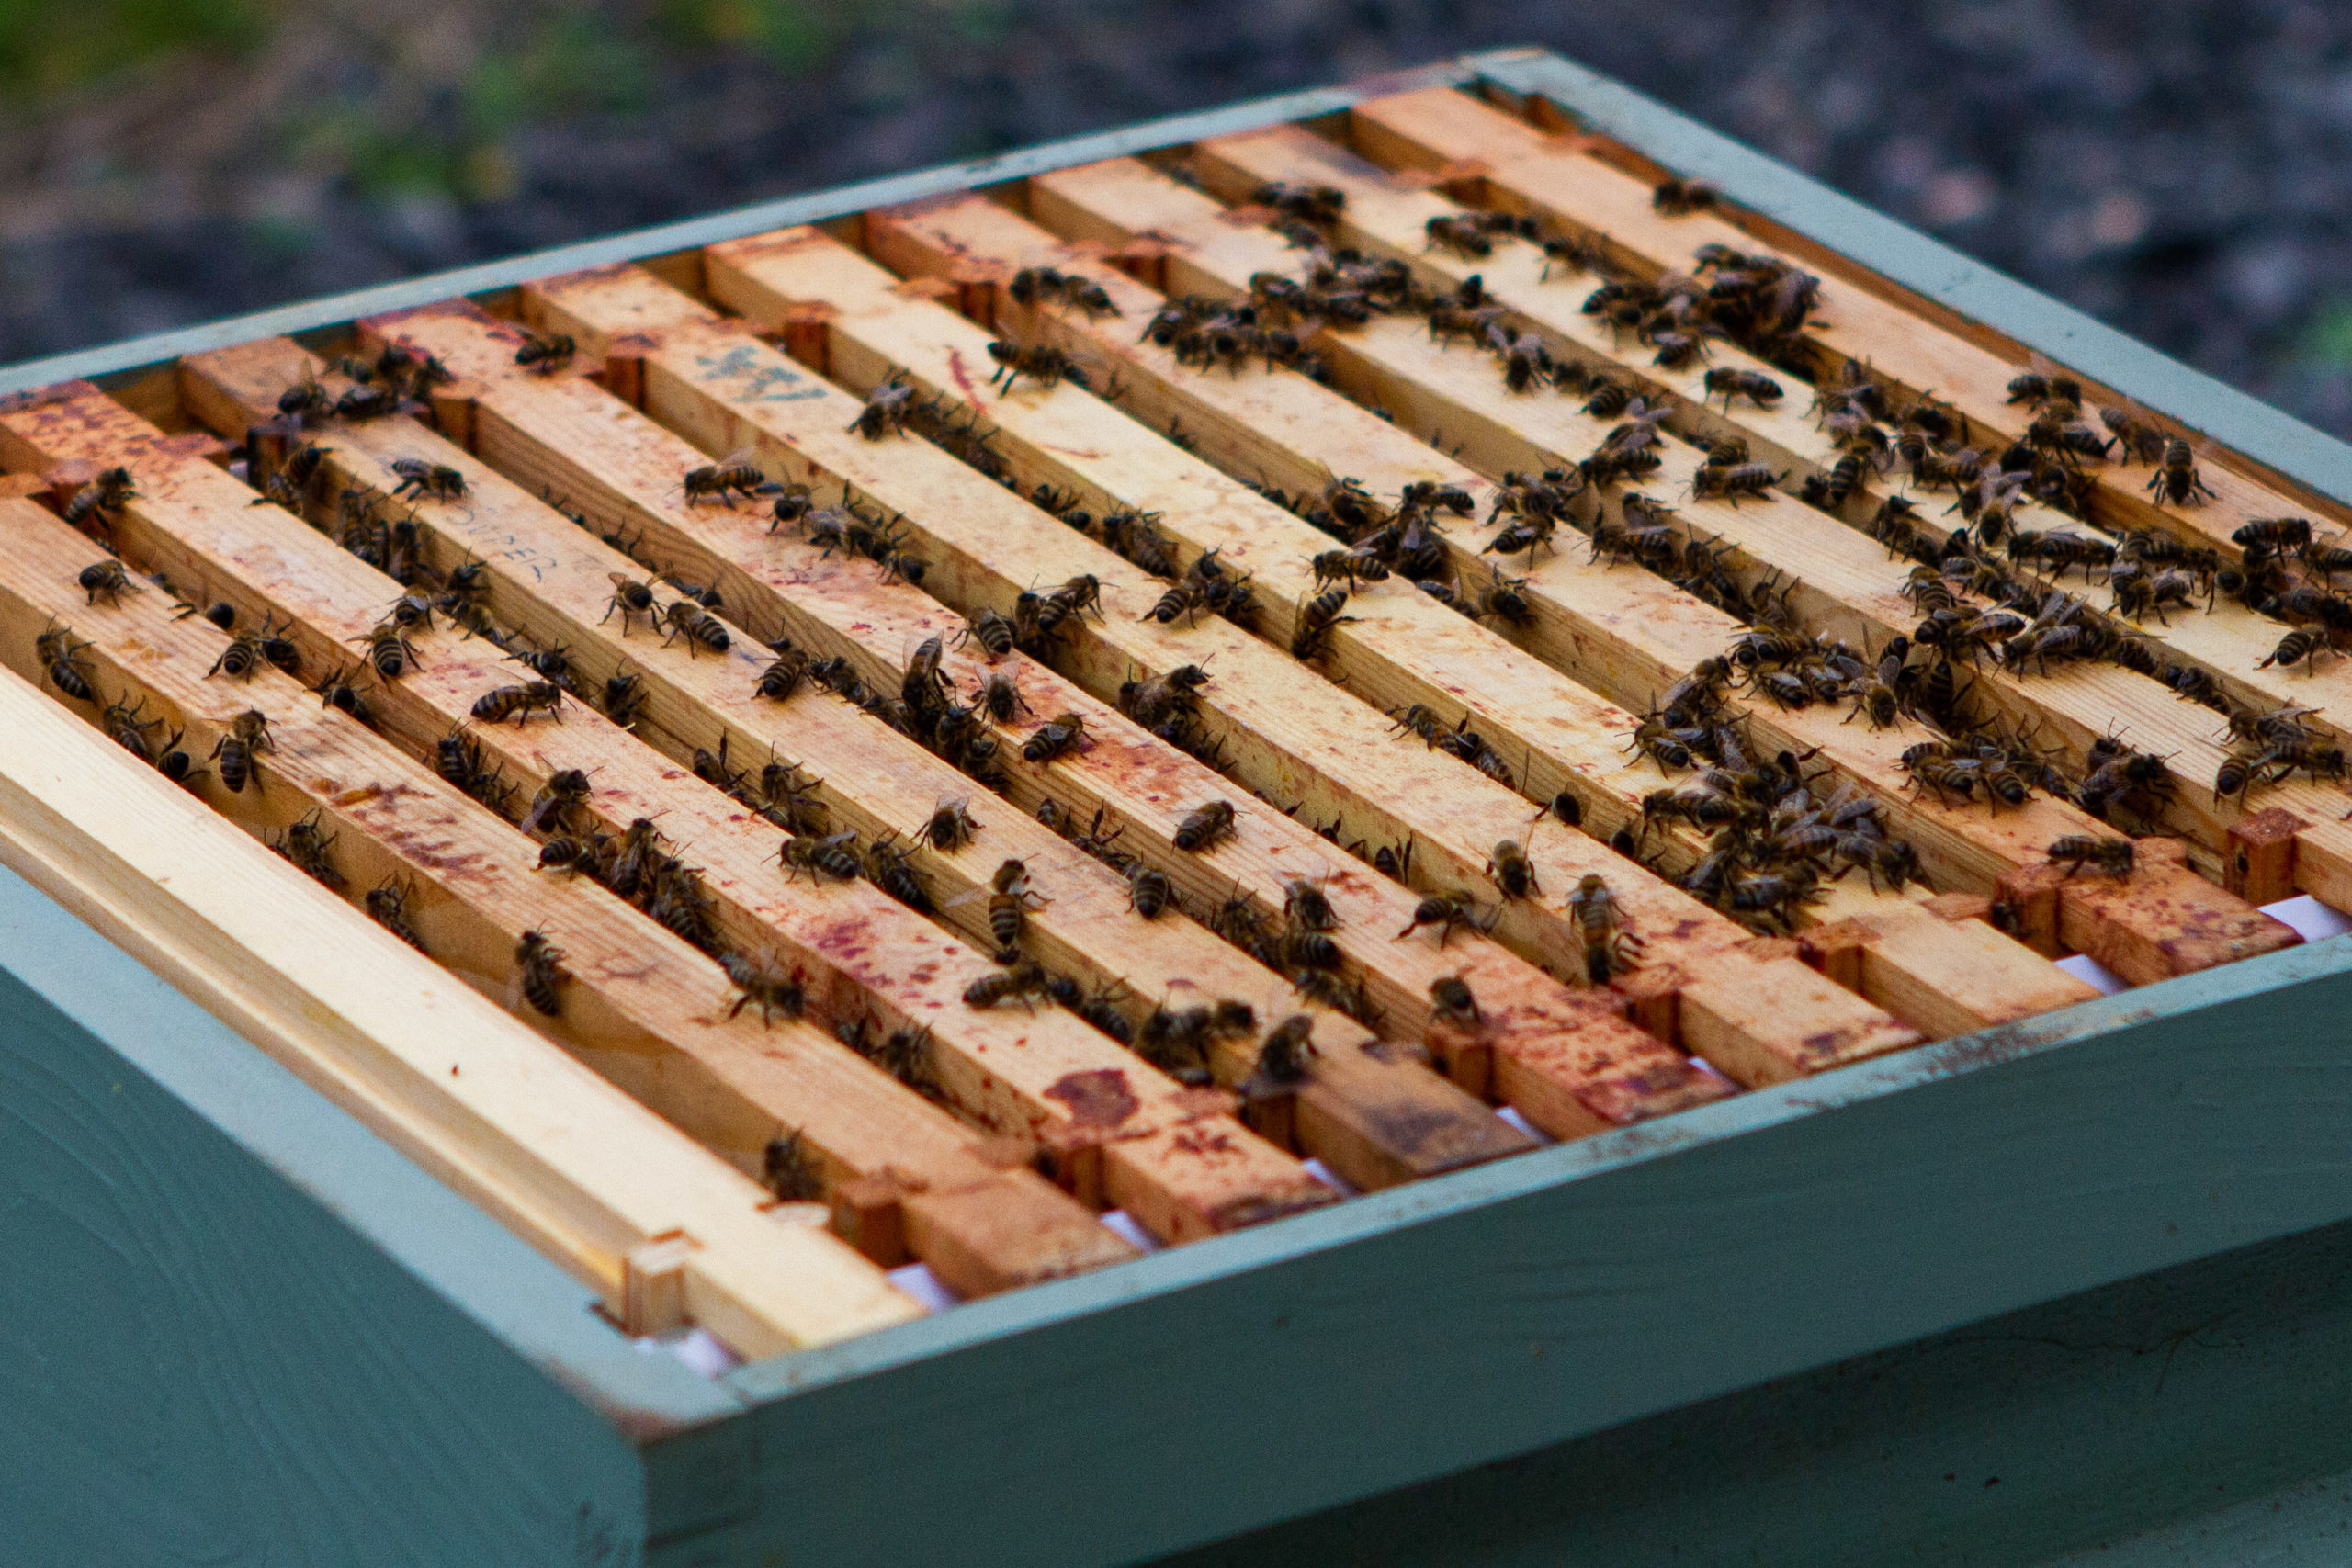 Infected beehives were found at a Perthshire apiary.